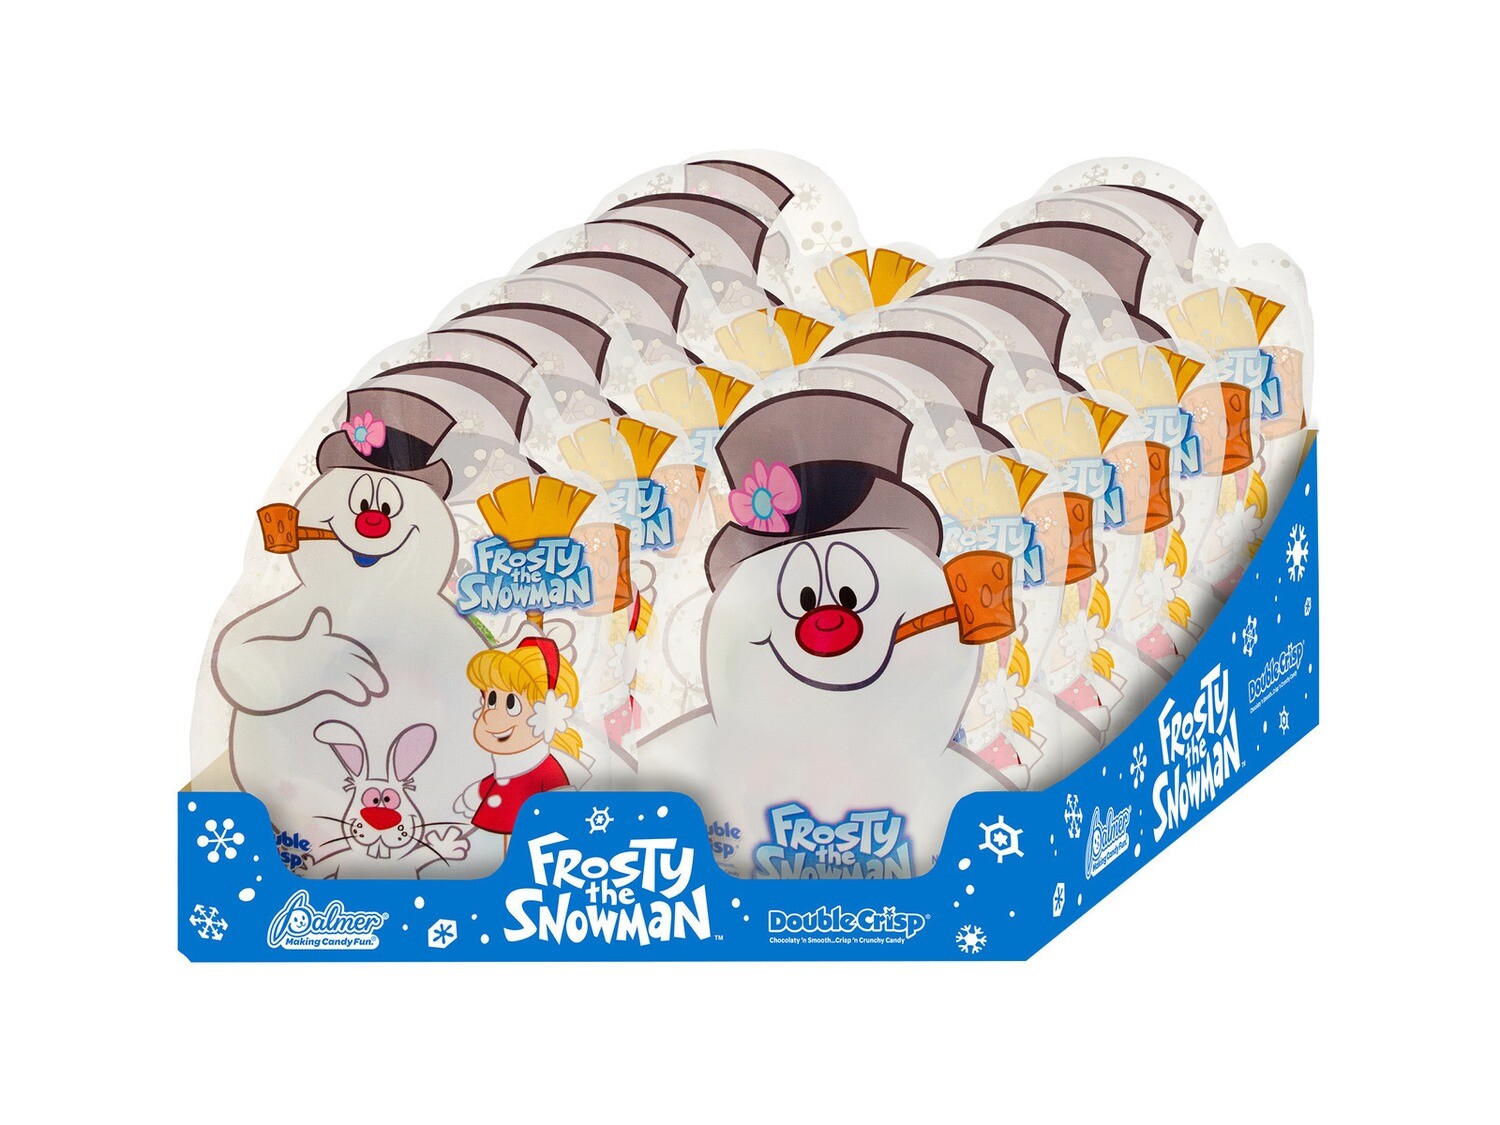 Frosty the Snowman Double Crisp Chocolate Candies